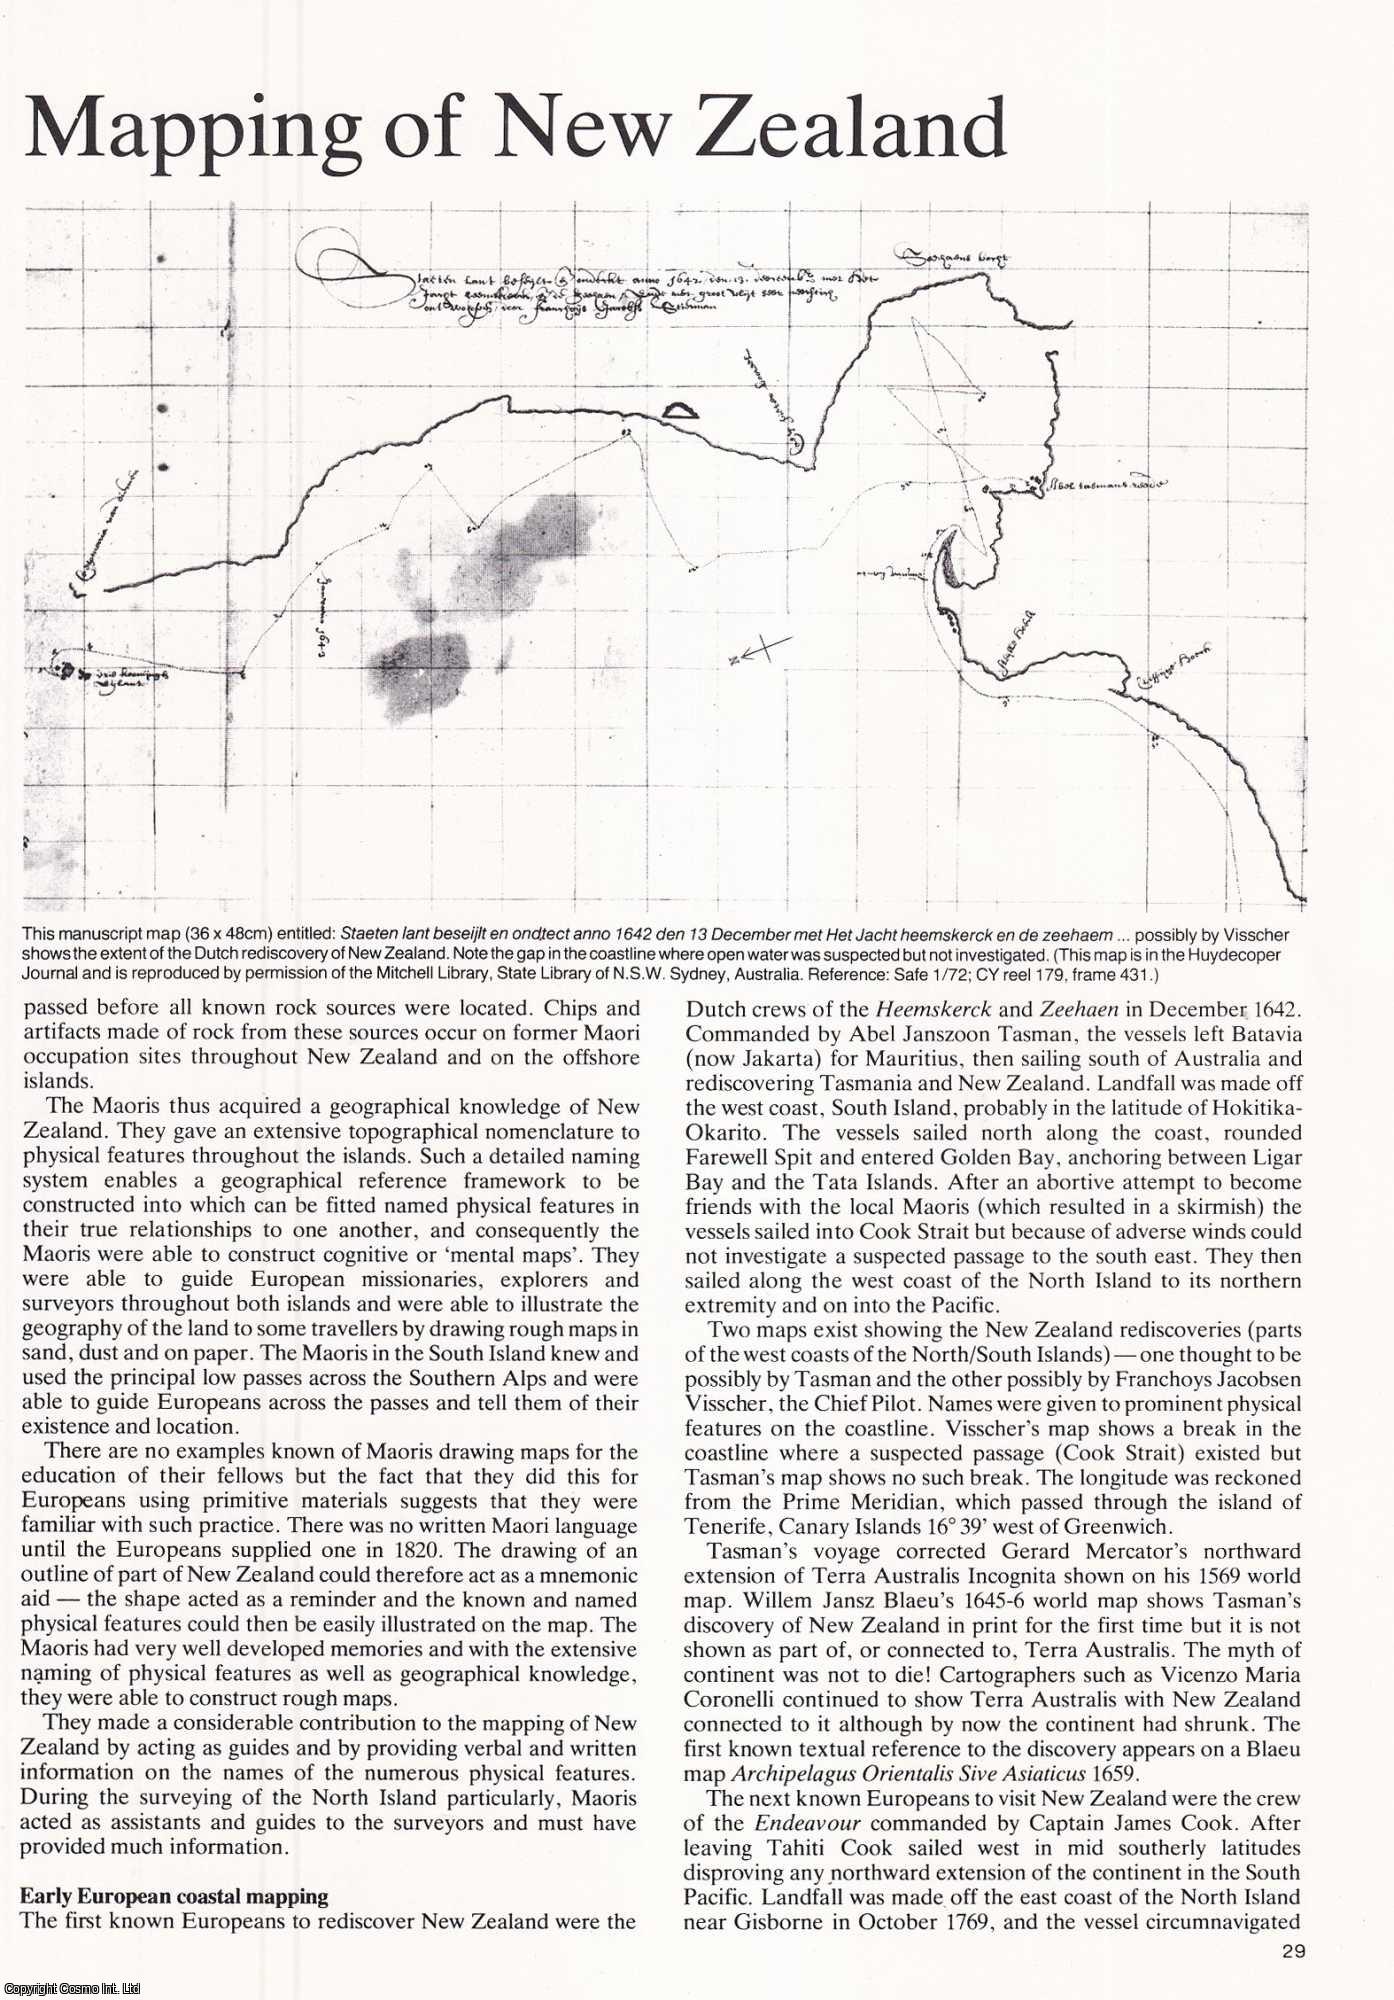 P.L. Barton - The History of the Mapping of New Zealand. An original article from Map Collector Magazine, 1980.